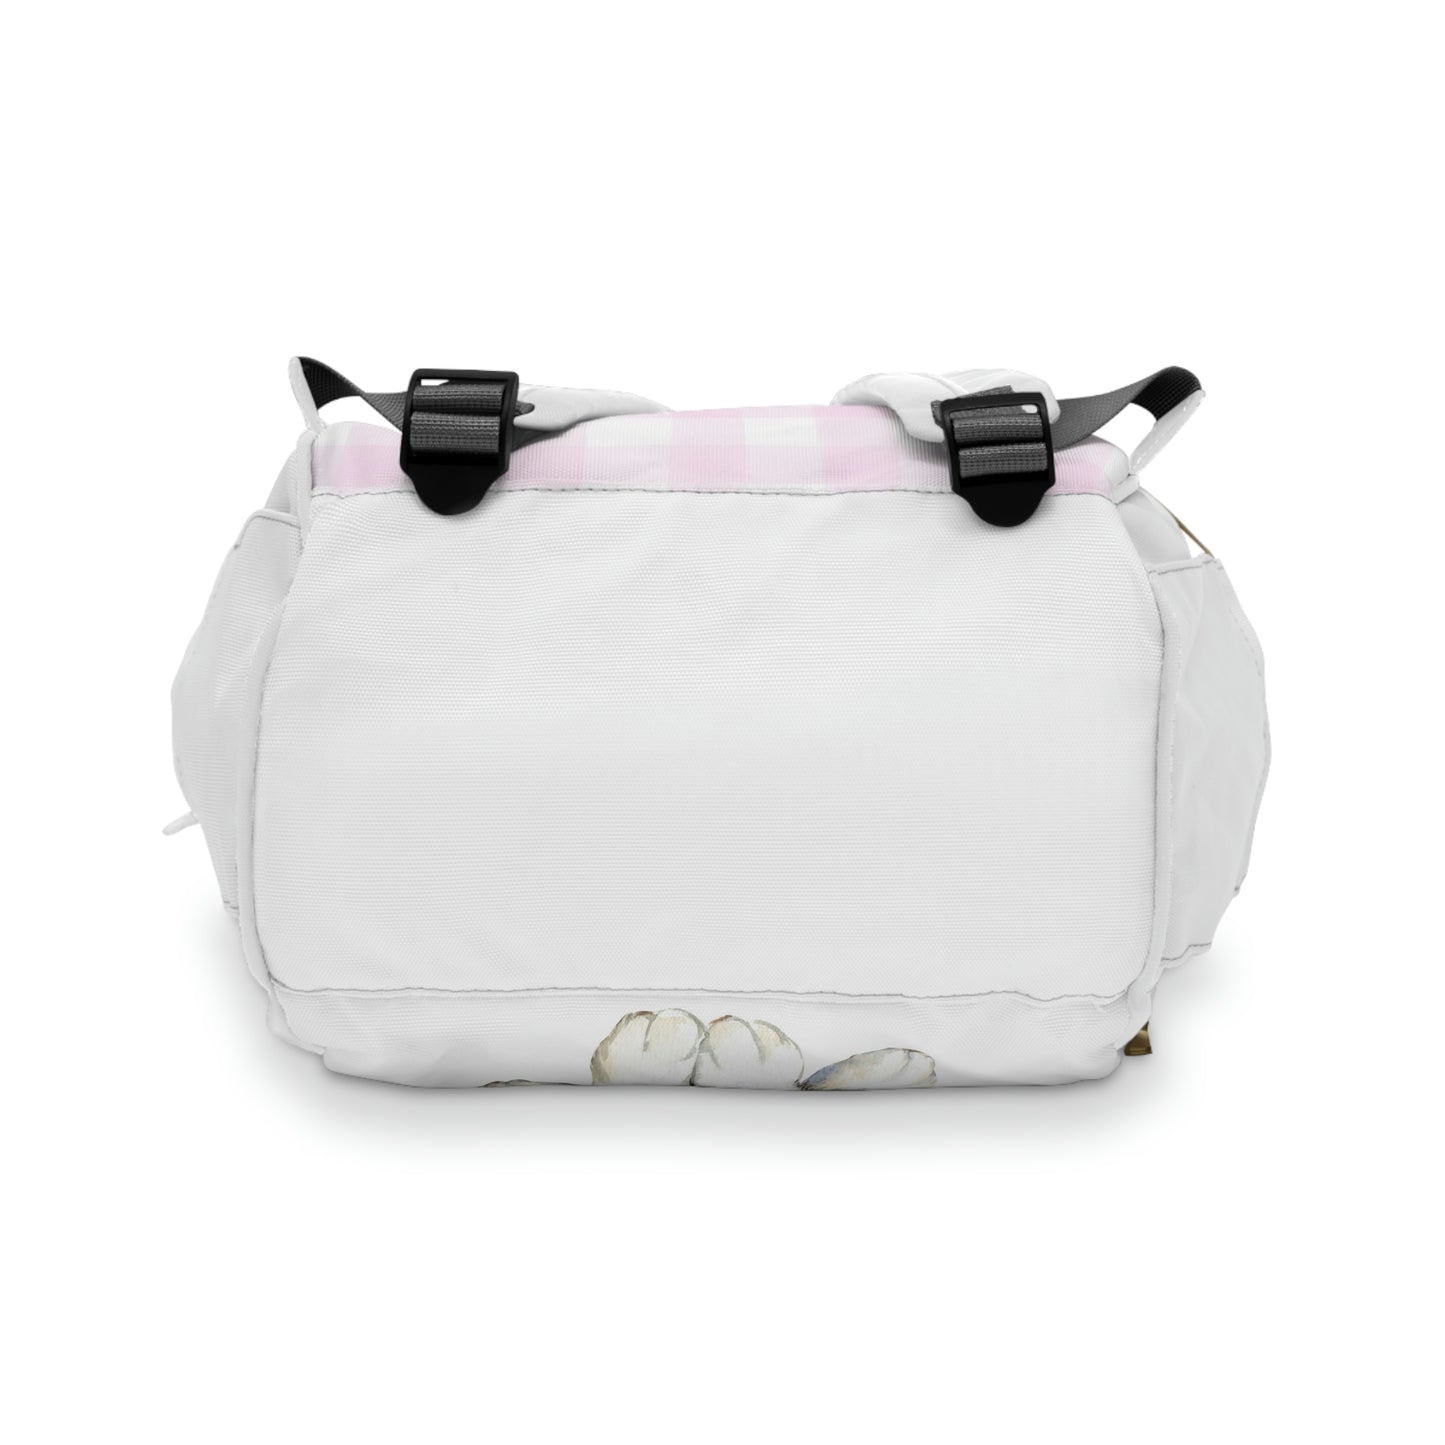 Bunny Flower Crown Pink Checked Multifunctional Diaper Backpack